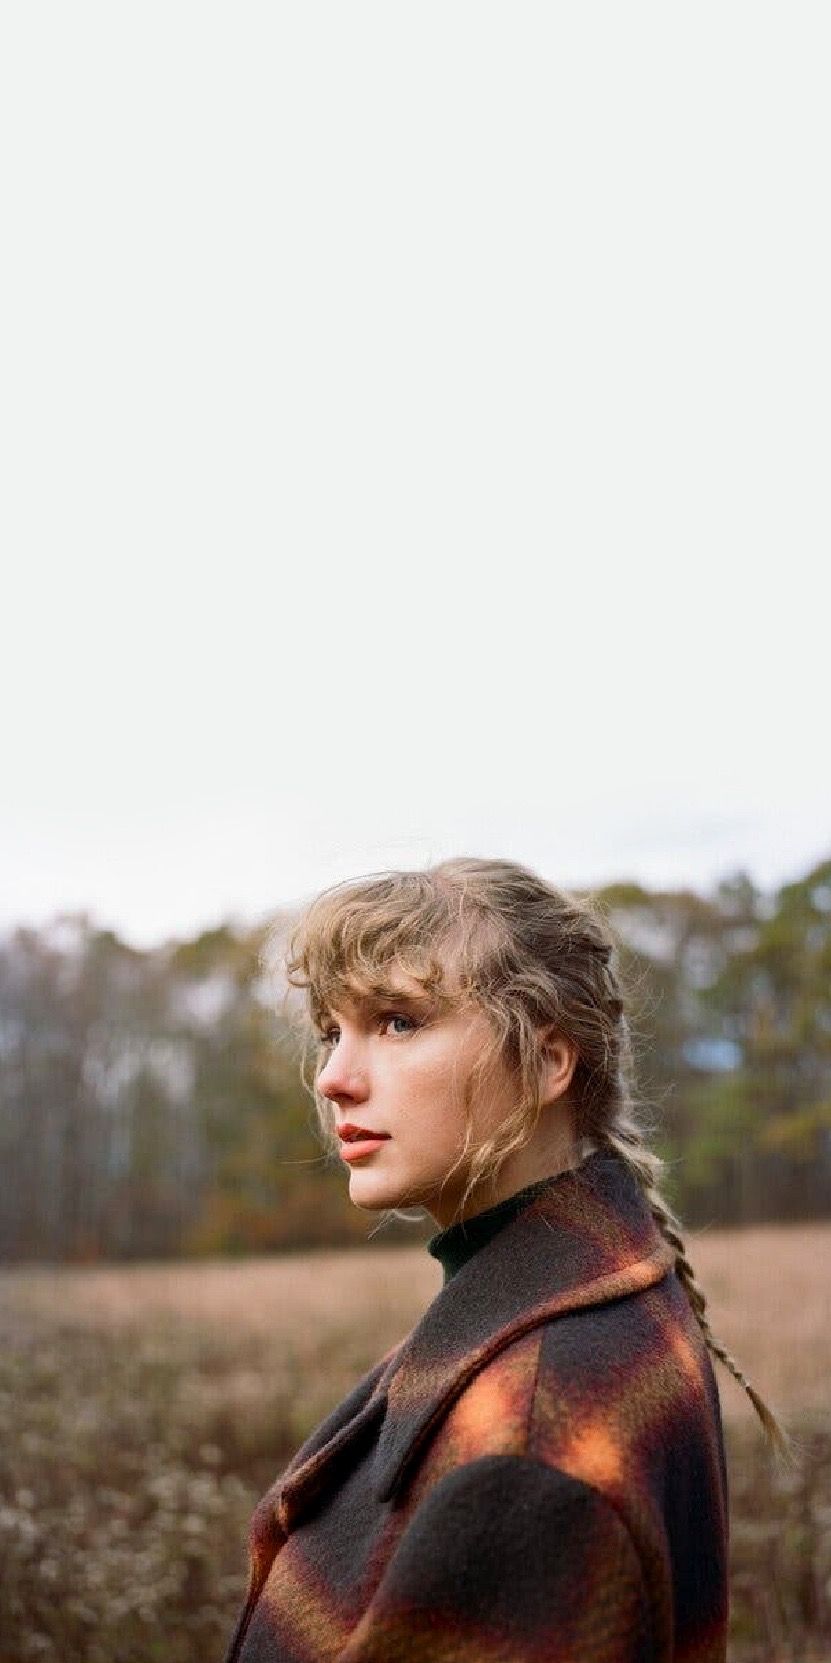 Taylor Swift Evermore Folklore Wallpaper for iPhone. Taylor swift album, Taylor swift wallpaper, Taylor swift picture